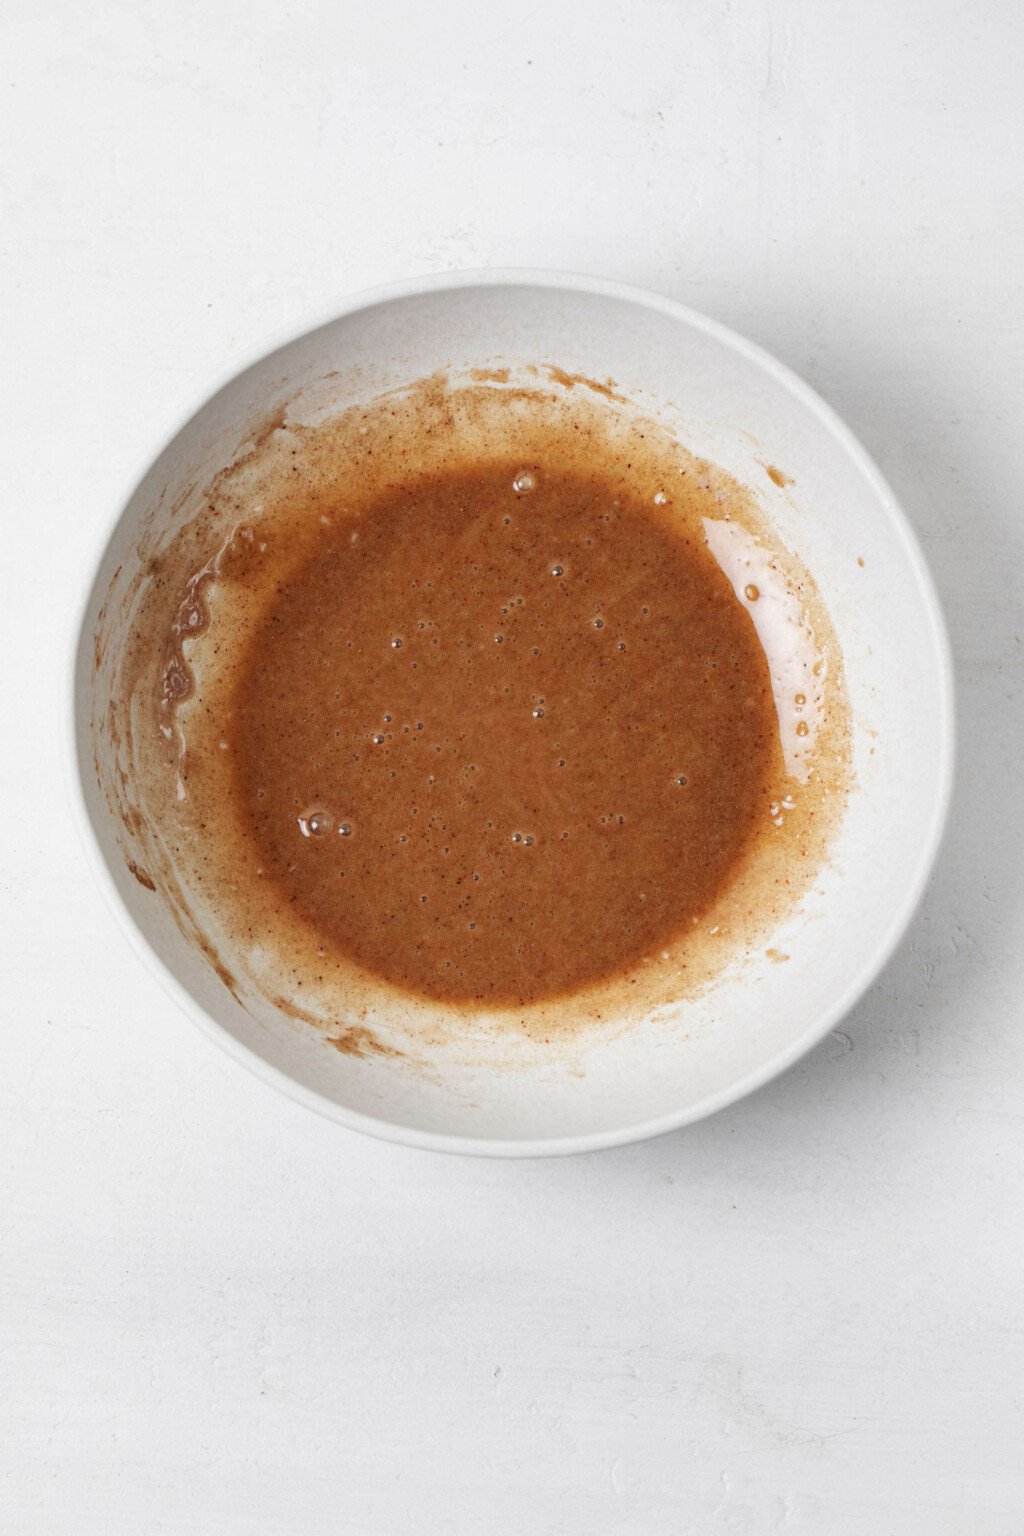 A small white bowl is filled with a brown, viscous liquid.